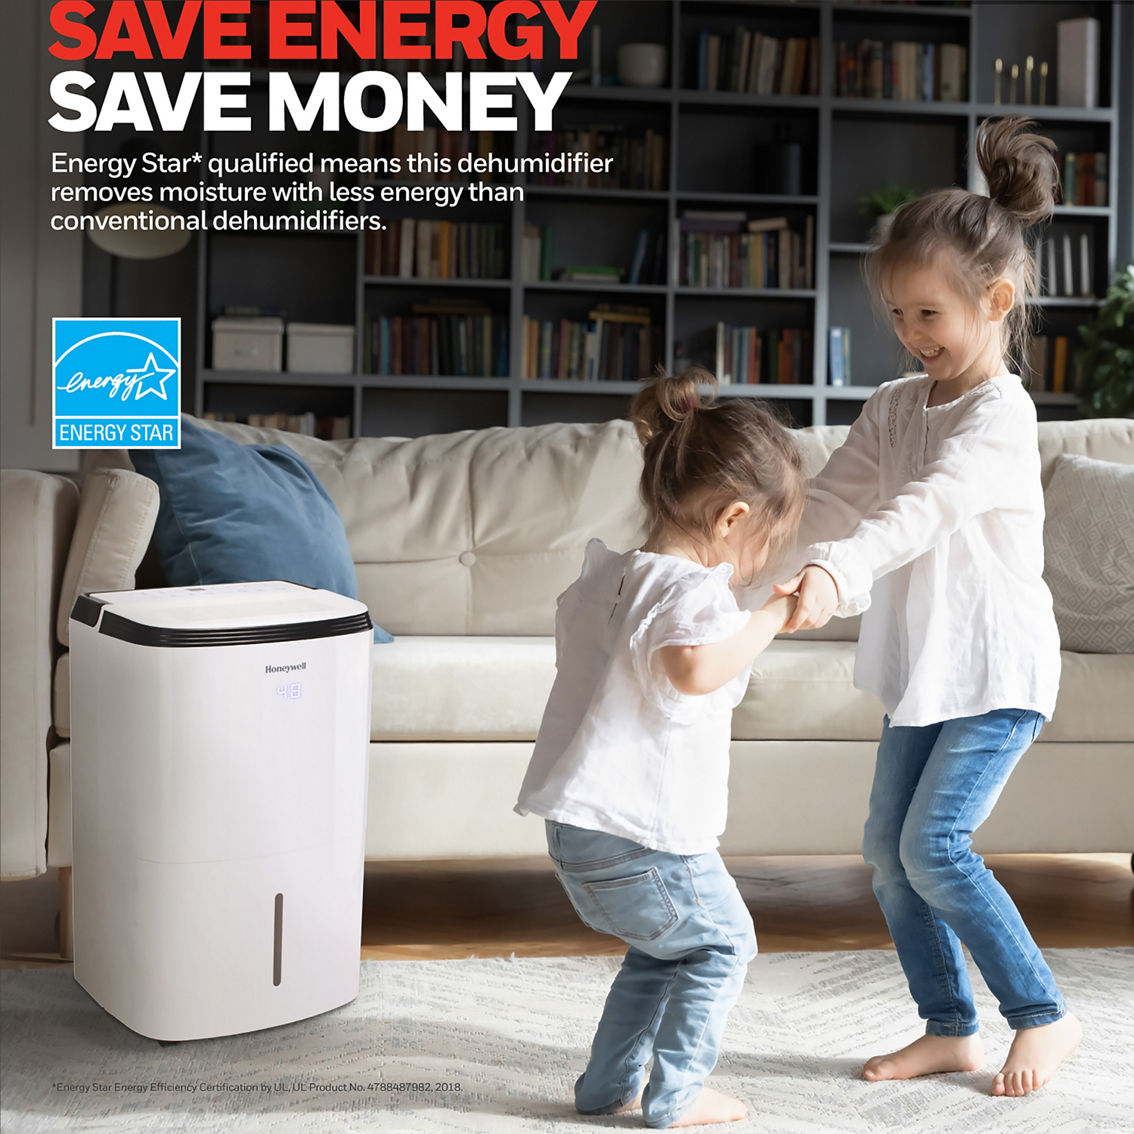 Honeywell 50 Pint Energy Star Dehumidifier with Washable Filter - Image 2 of 6